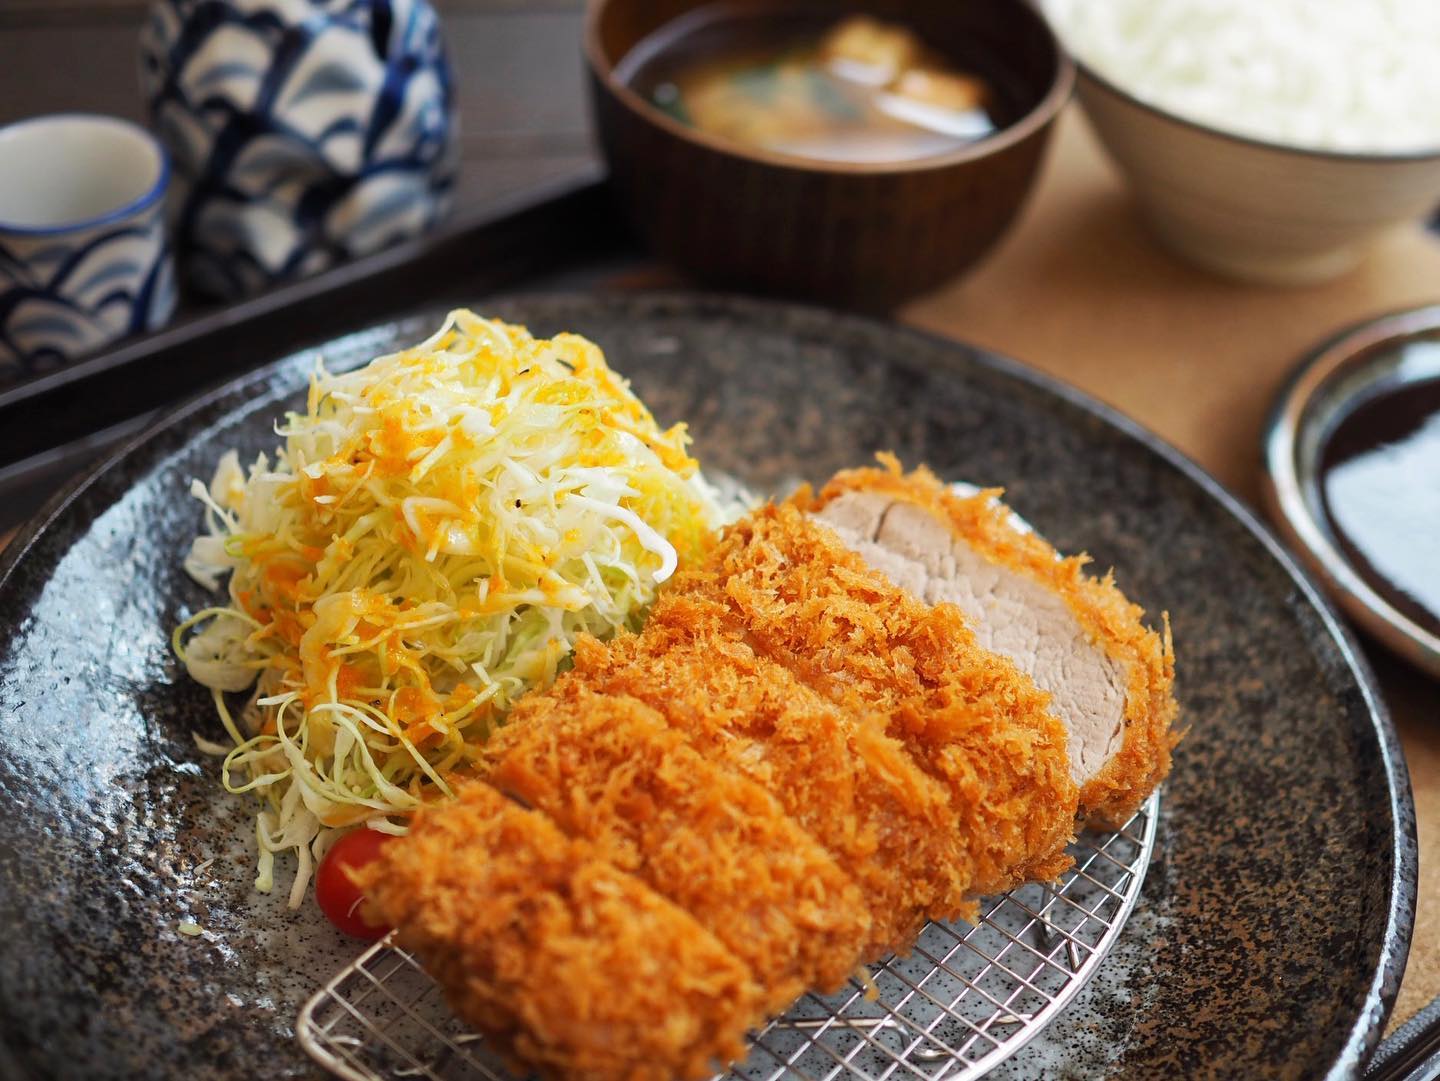 Tonkatsu cutlet next to mound of shredded cabbage.